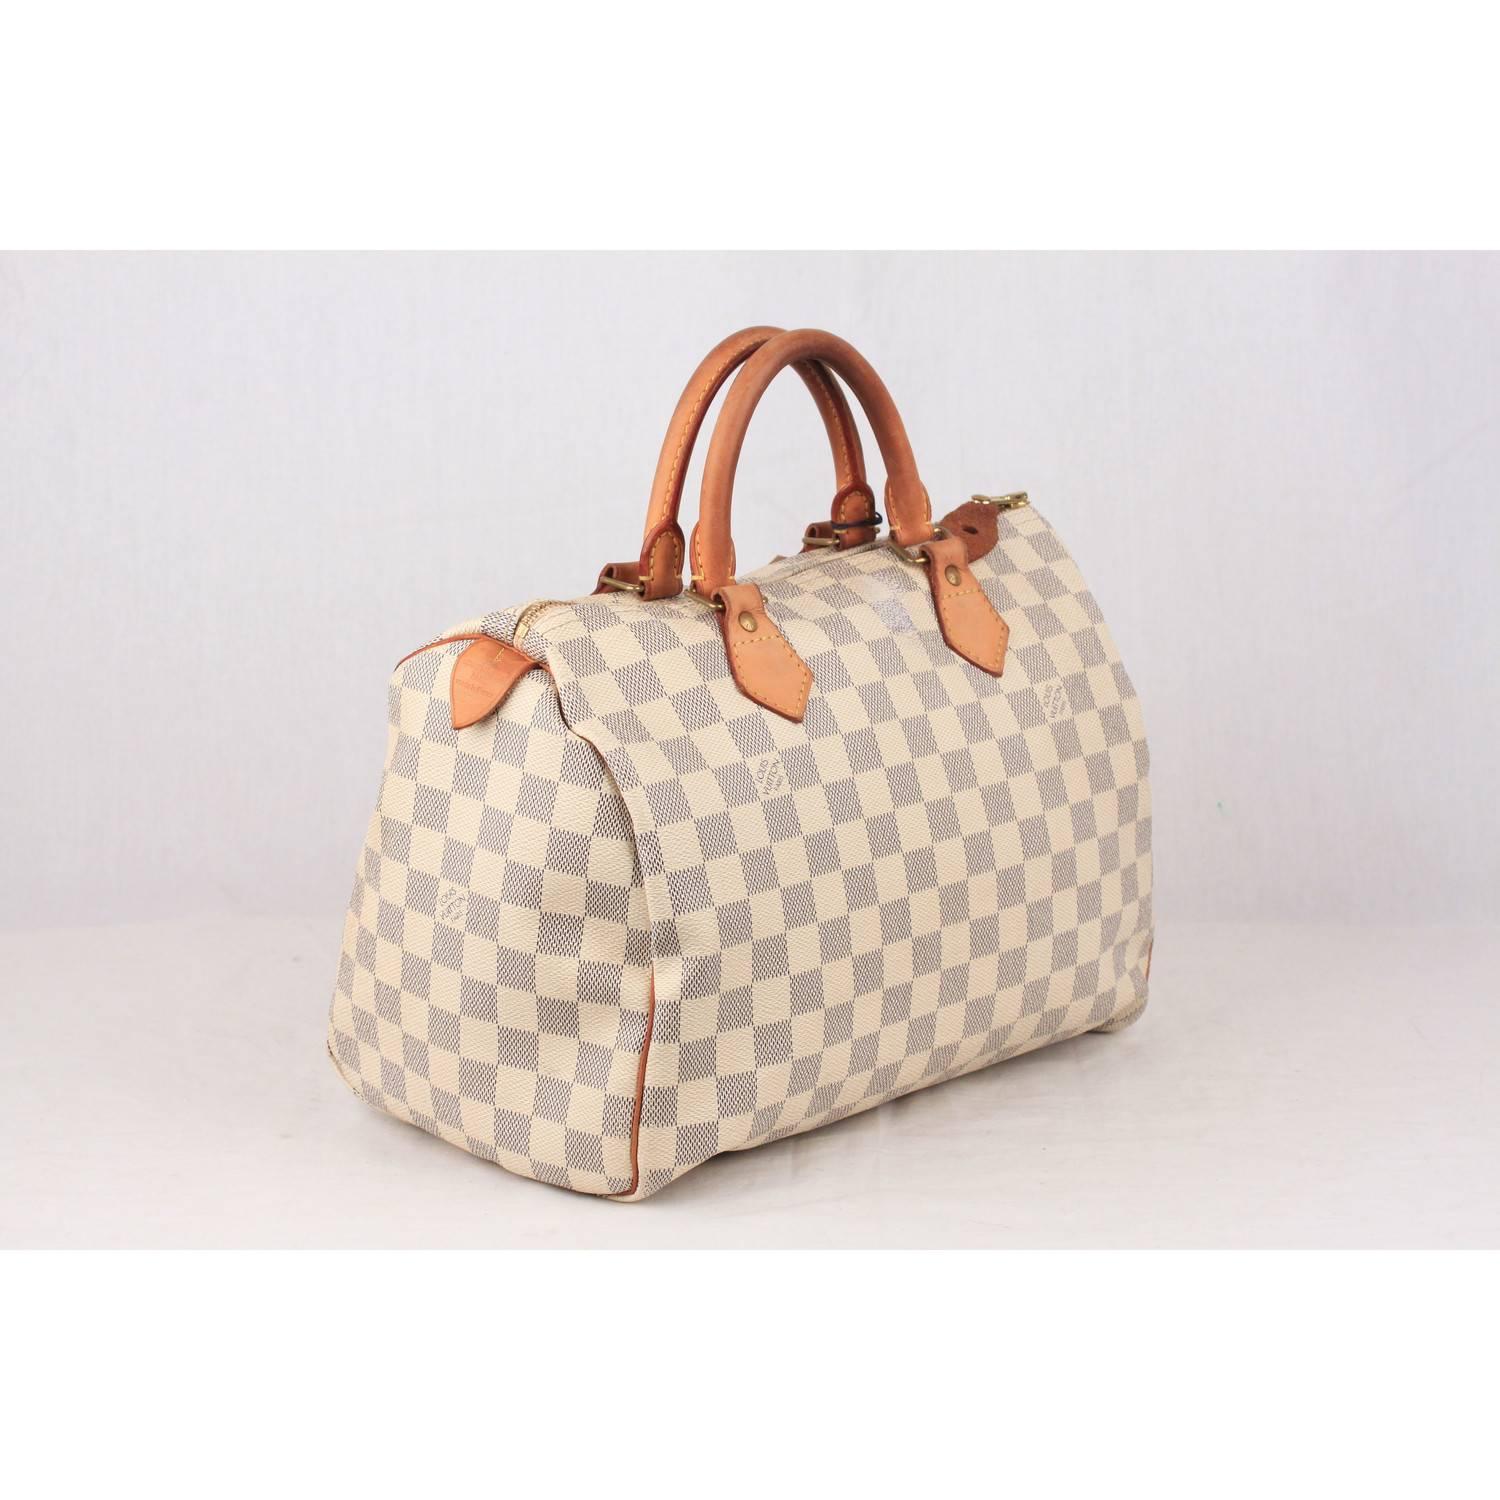 Iconic Louis Vuitton SPEEDY 30 in DAMIER AZUR canvas. Beige fabric lining and 1 side open pocket inside. Beige leather handles and piping. Gold tone hardware. Interior pocket and D-ring for keys and accessories. Original padlock included (keys are